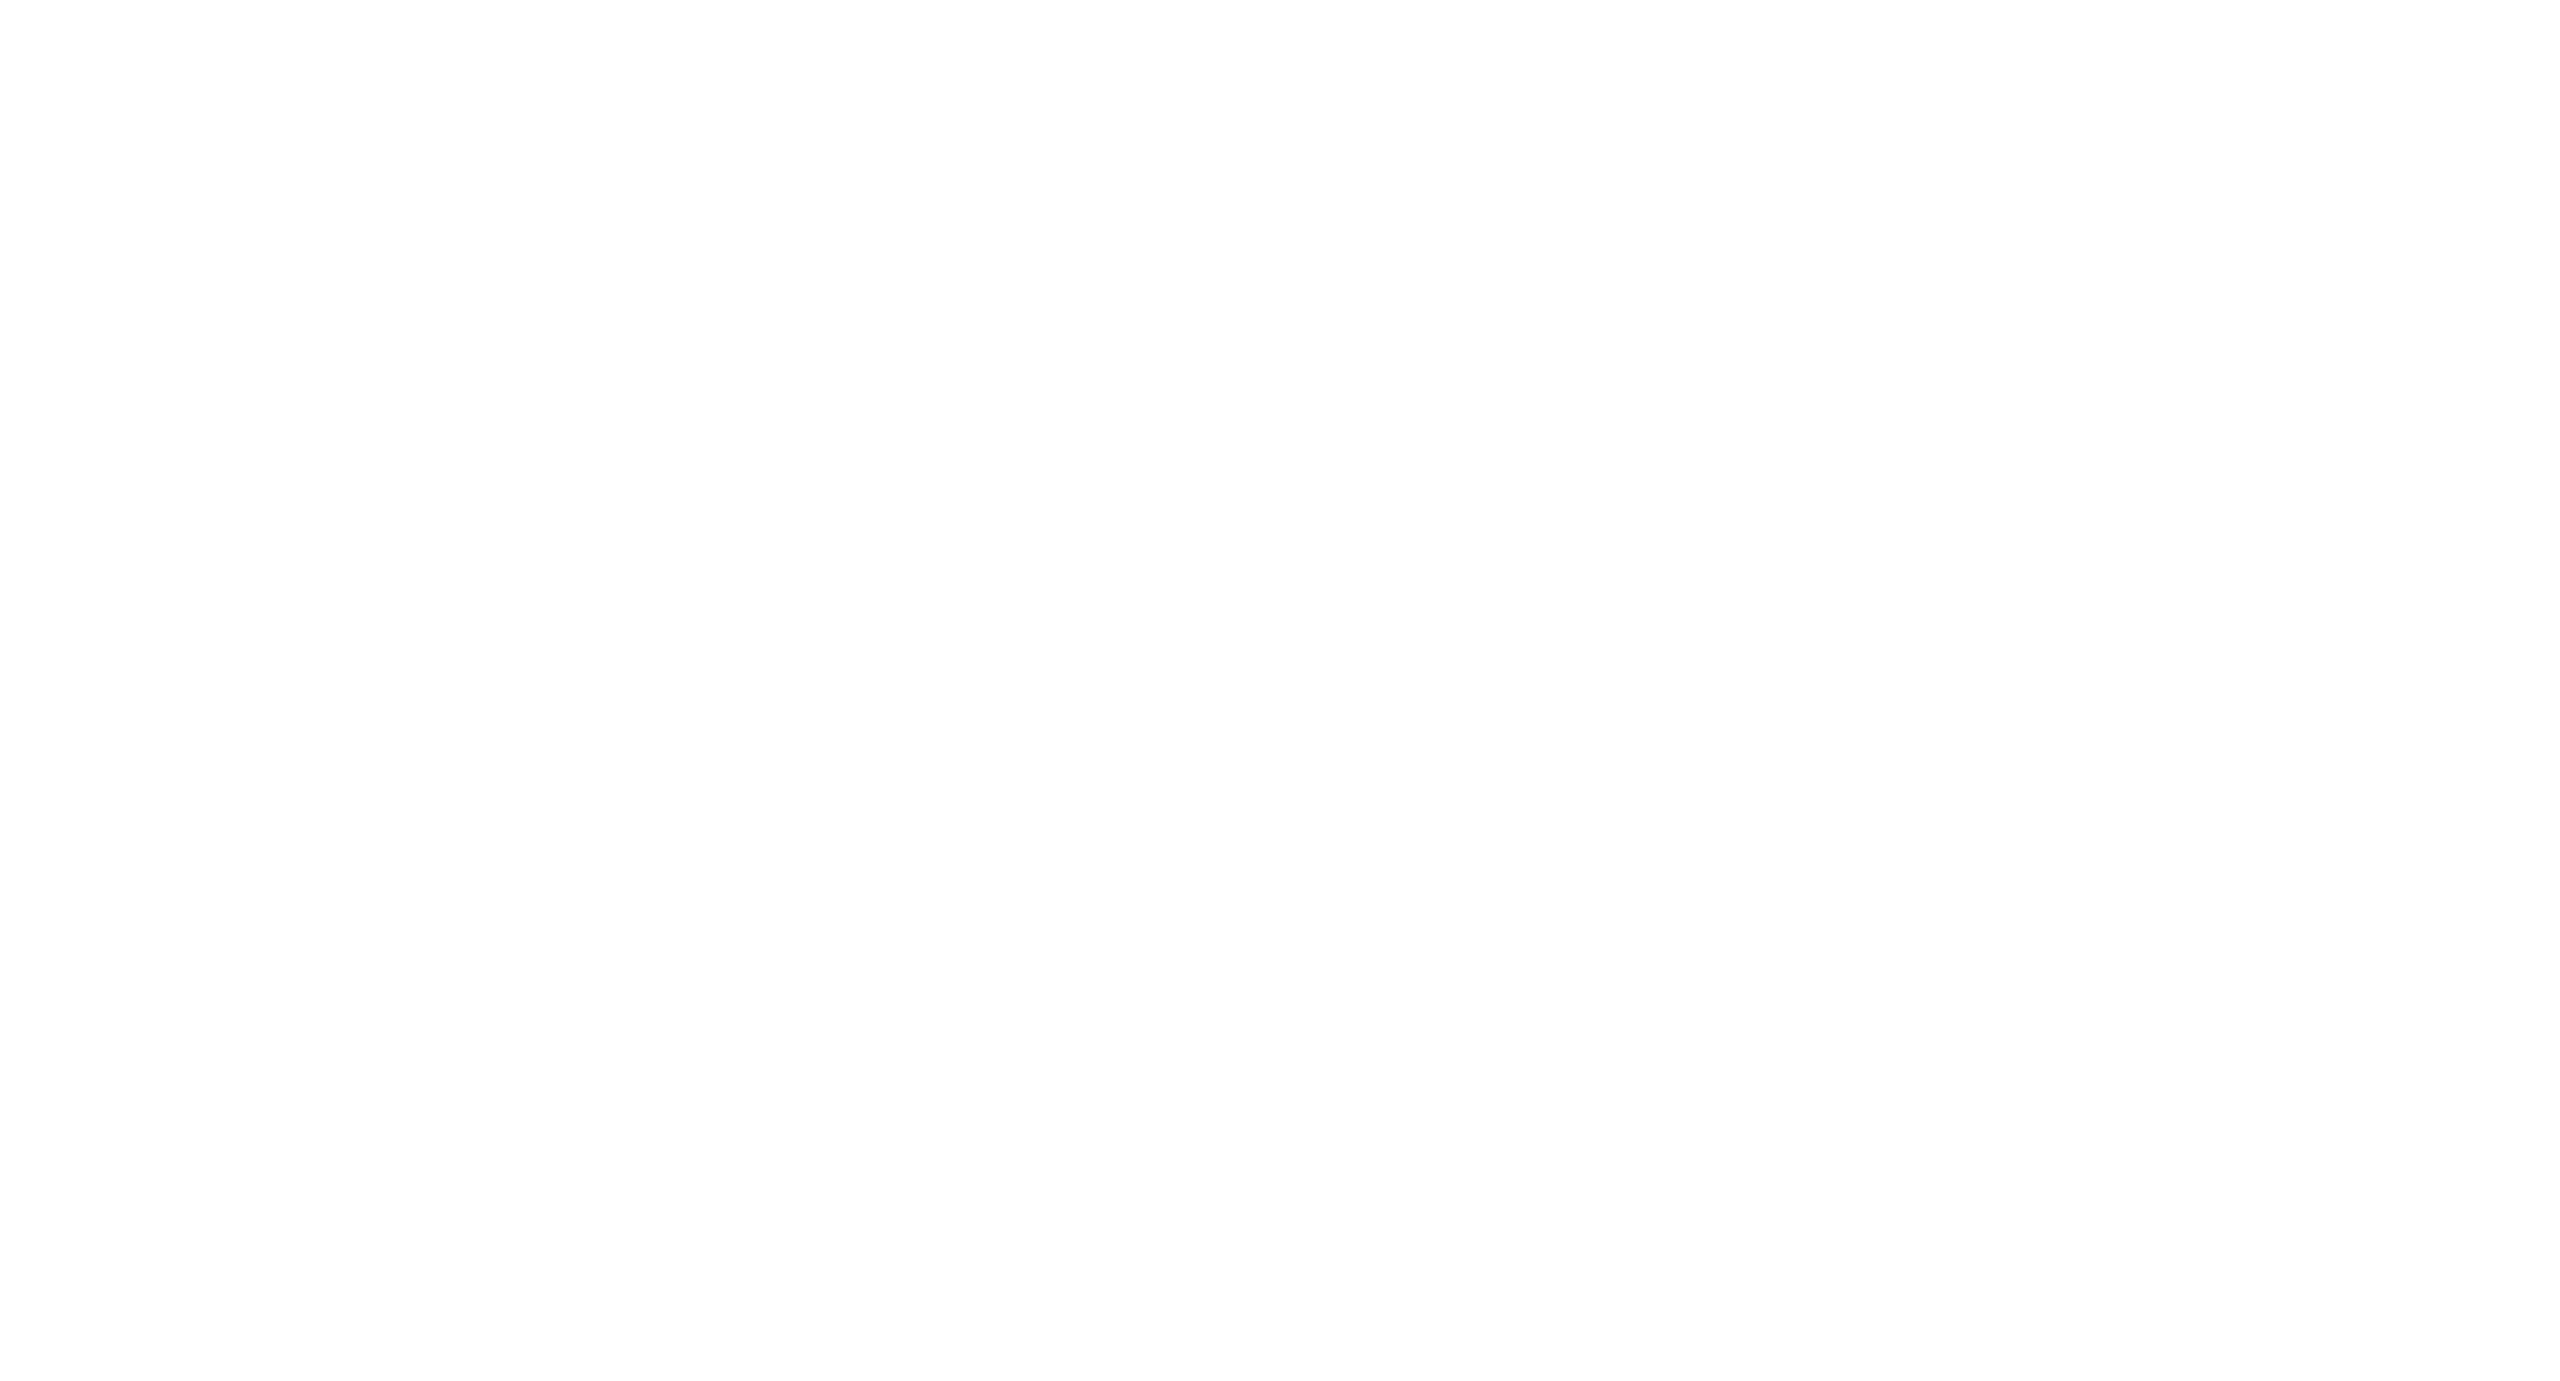 Universal pictures logo.svg